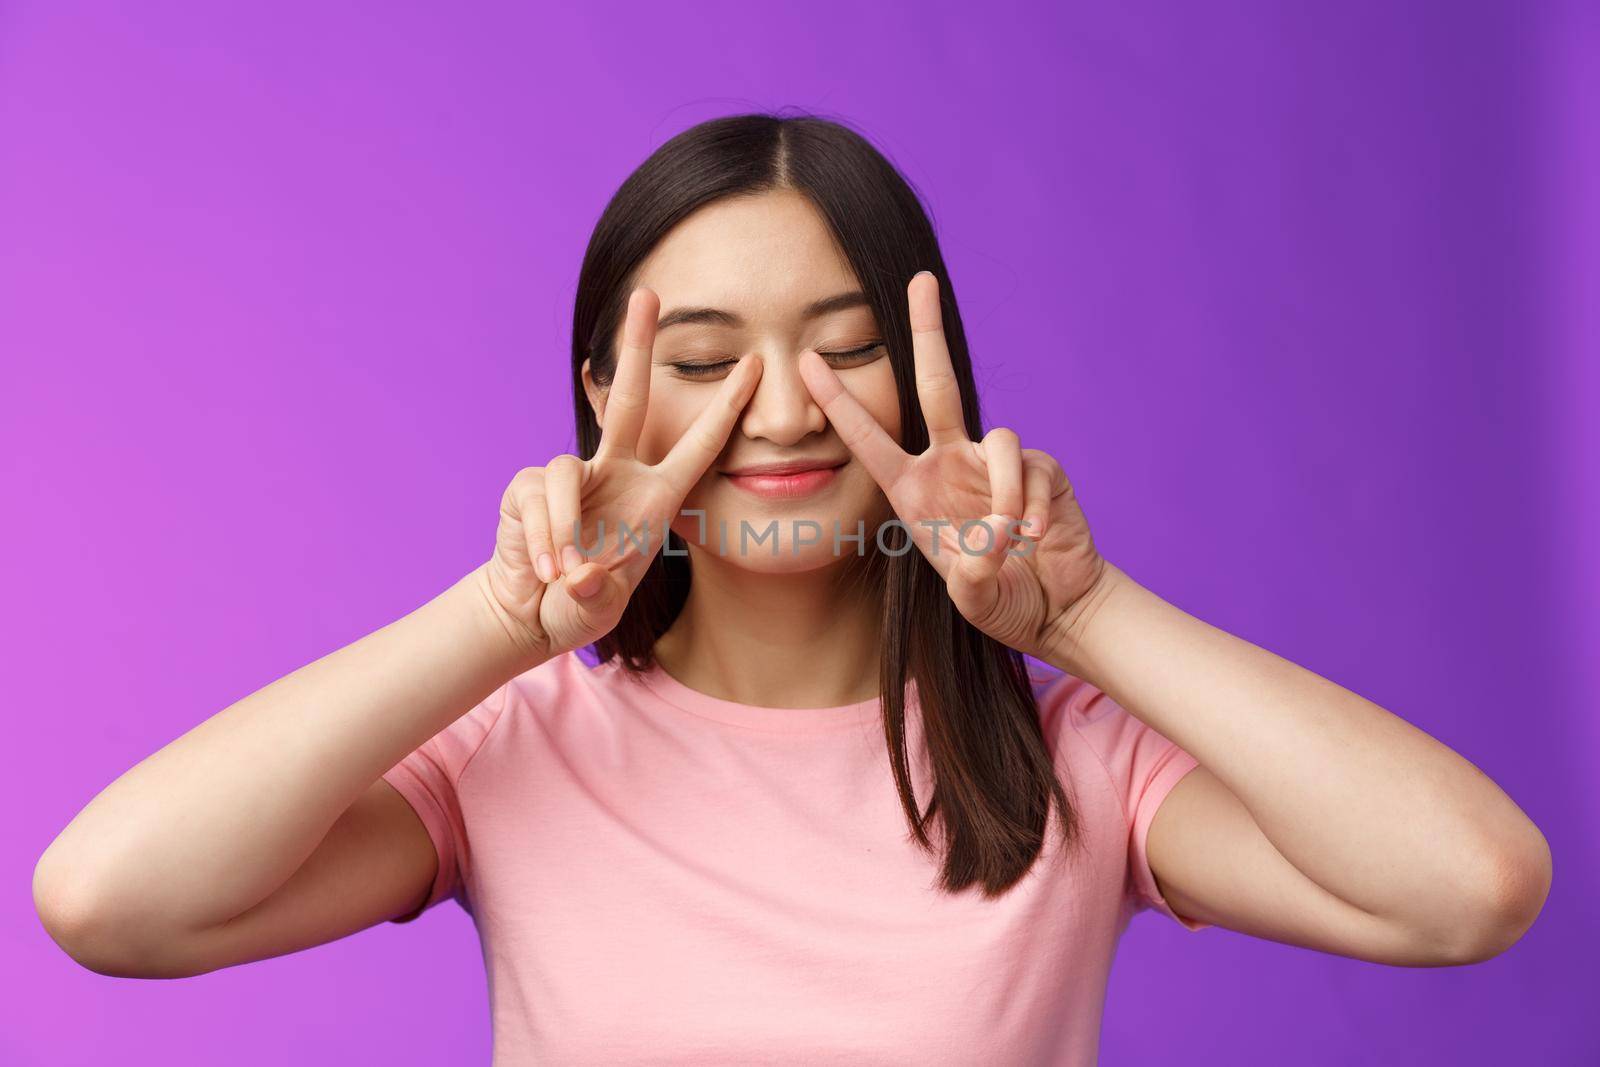 Close-up carefree friendly cute tender asian woman feeling upbeat, close eyes and smiling dreamy, show victory peace signs on face, stay positive, enjoy summer holiday, stand purple background.